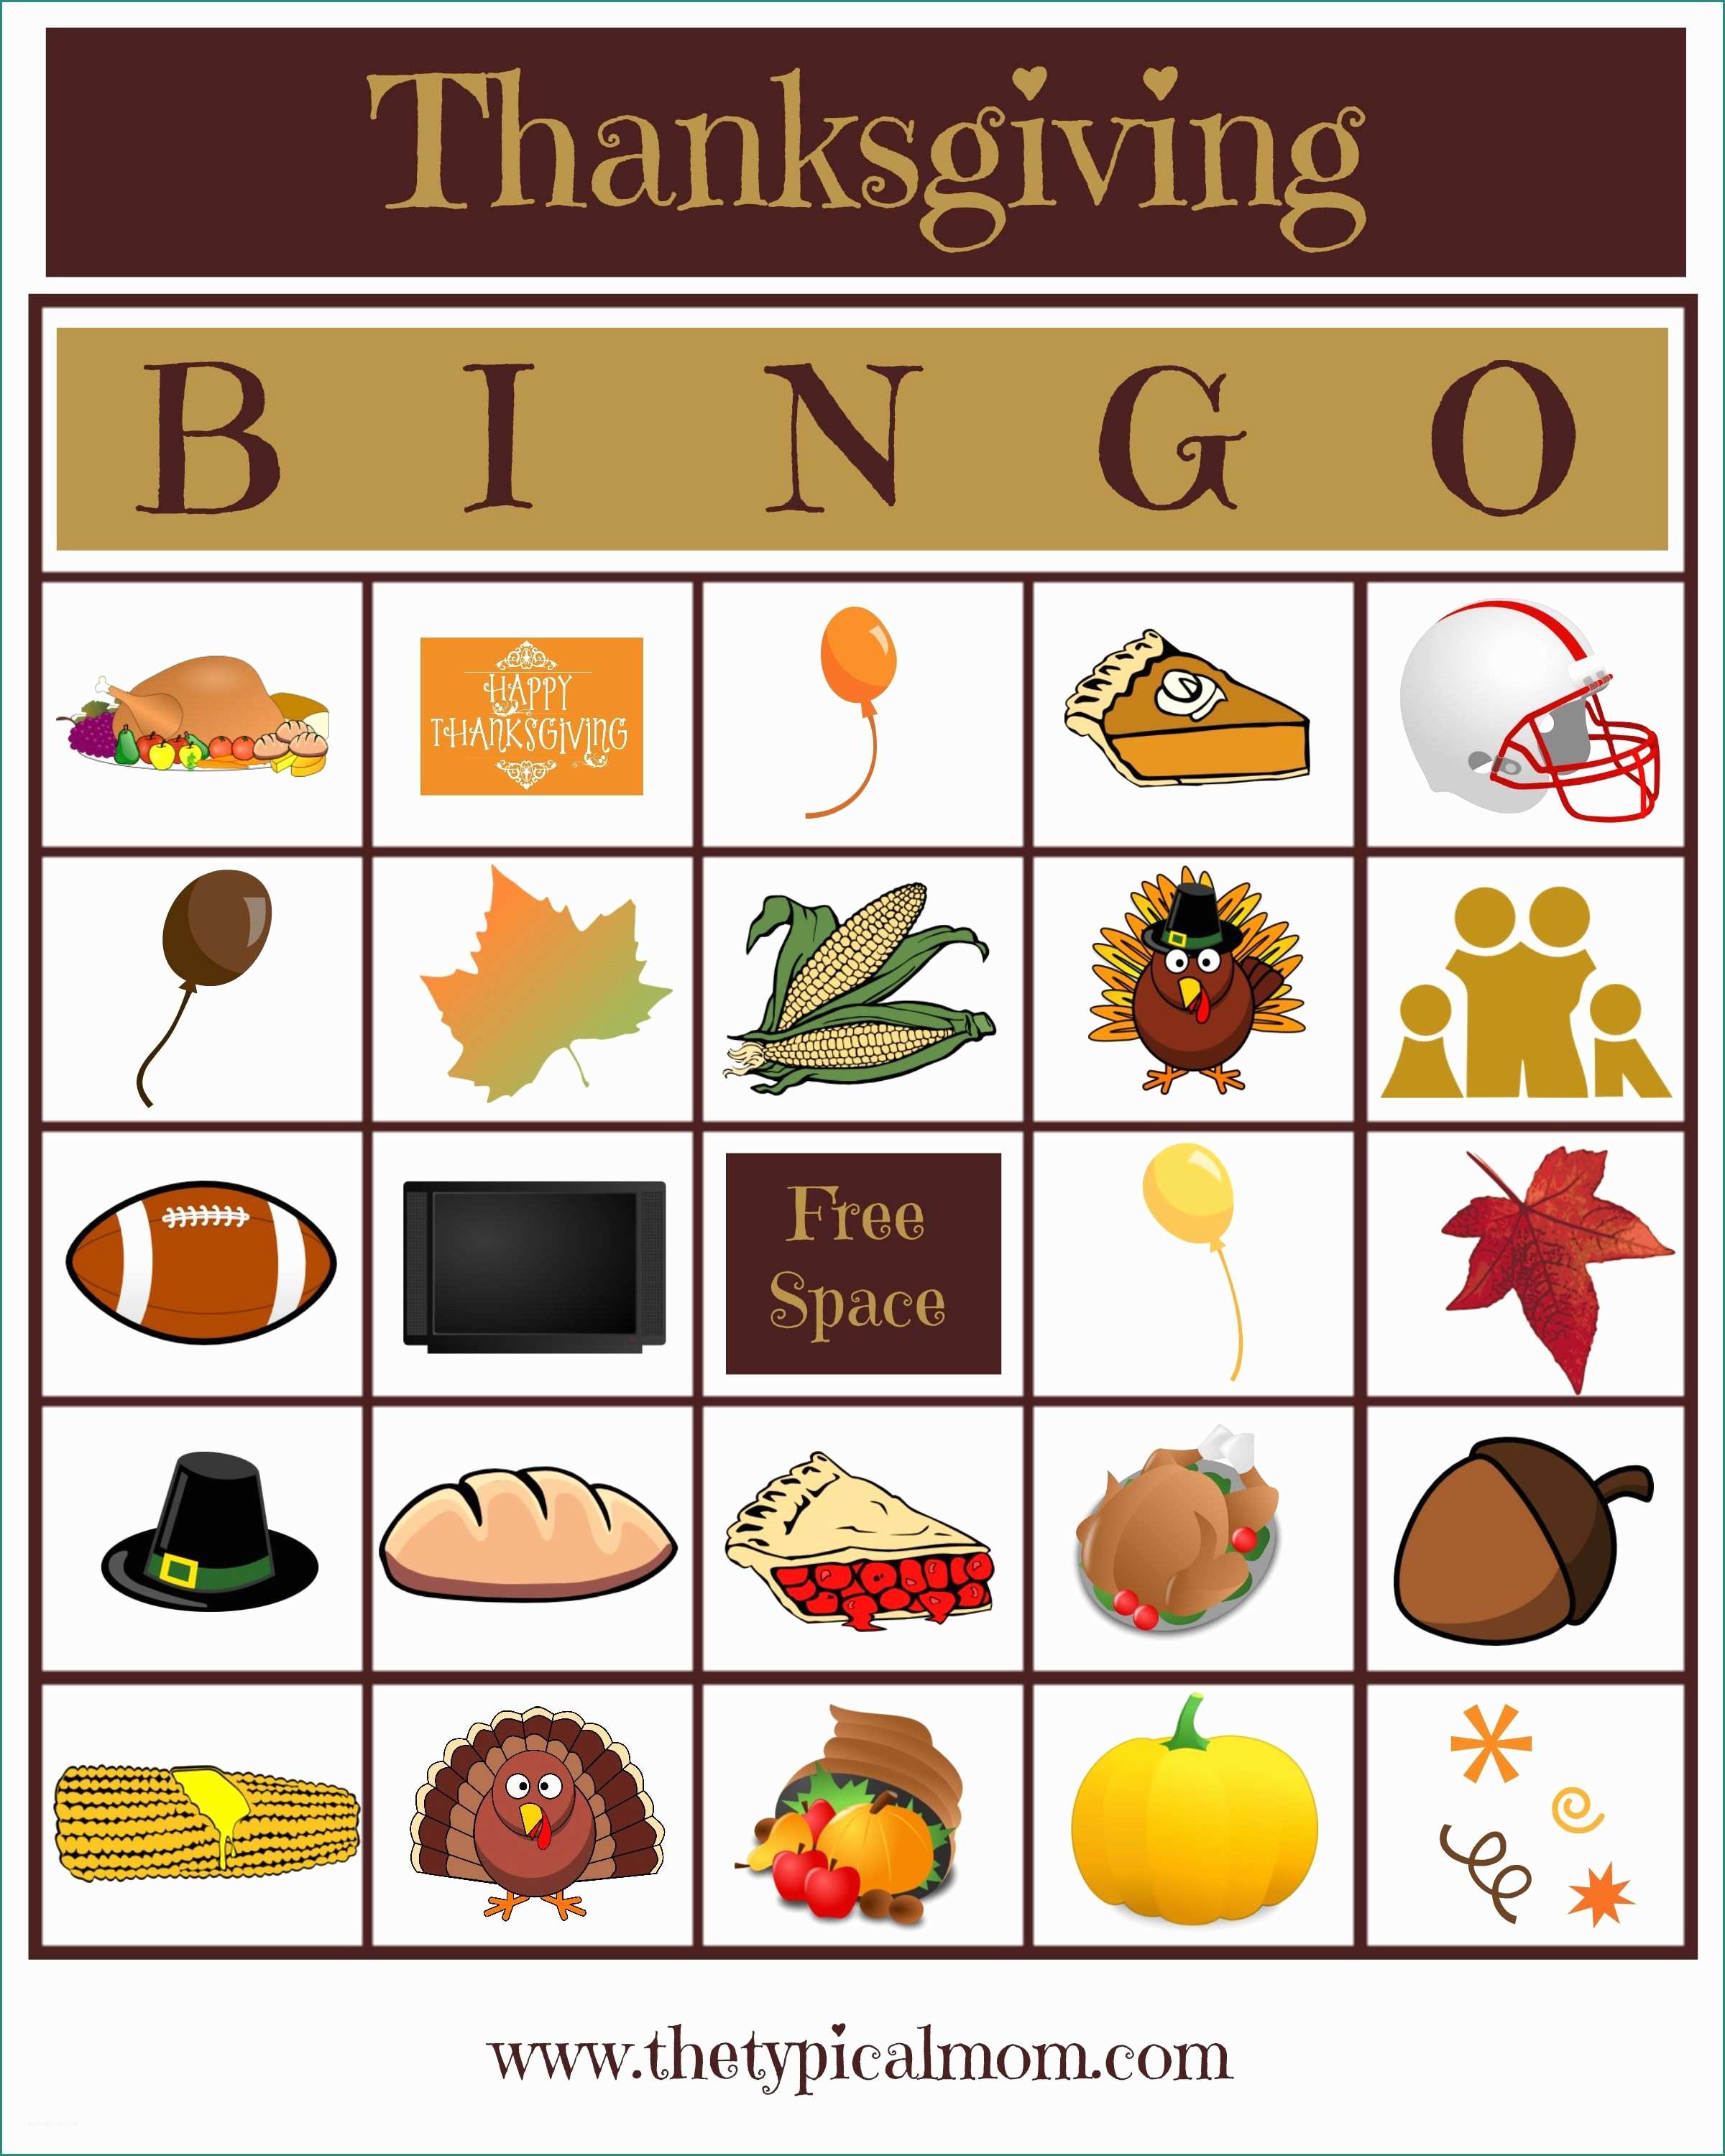 Cartelle tombola Gratis E Thanksgiving Bingo Game that Everyone Will Love Great for All Ages